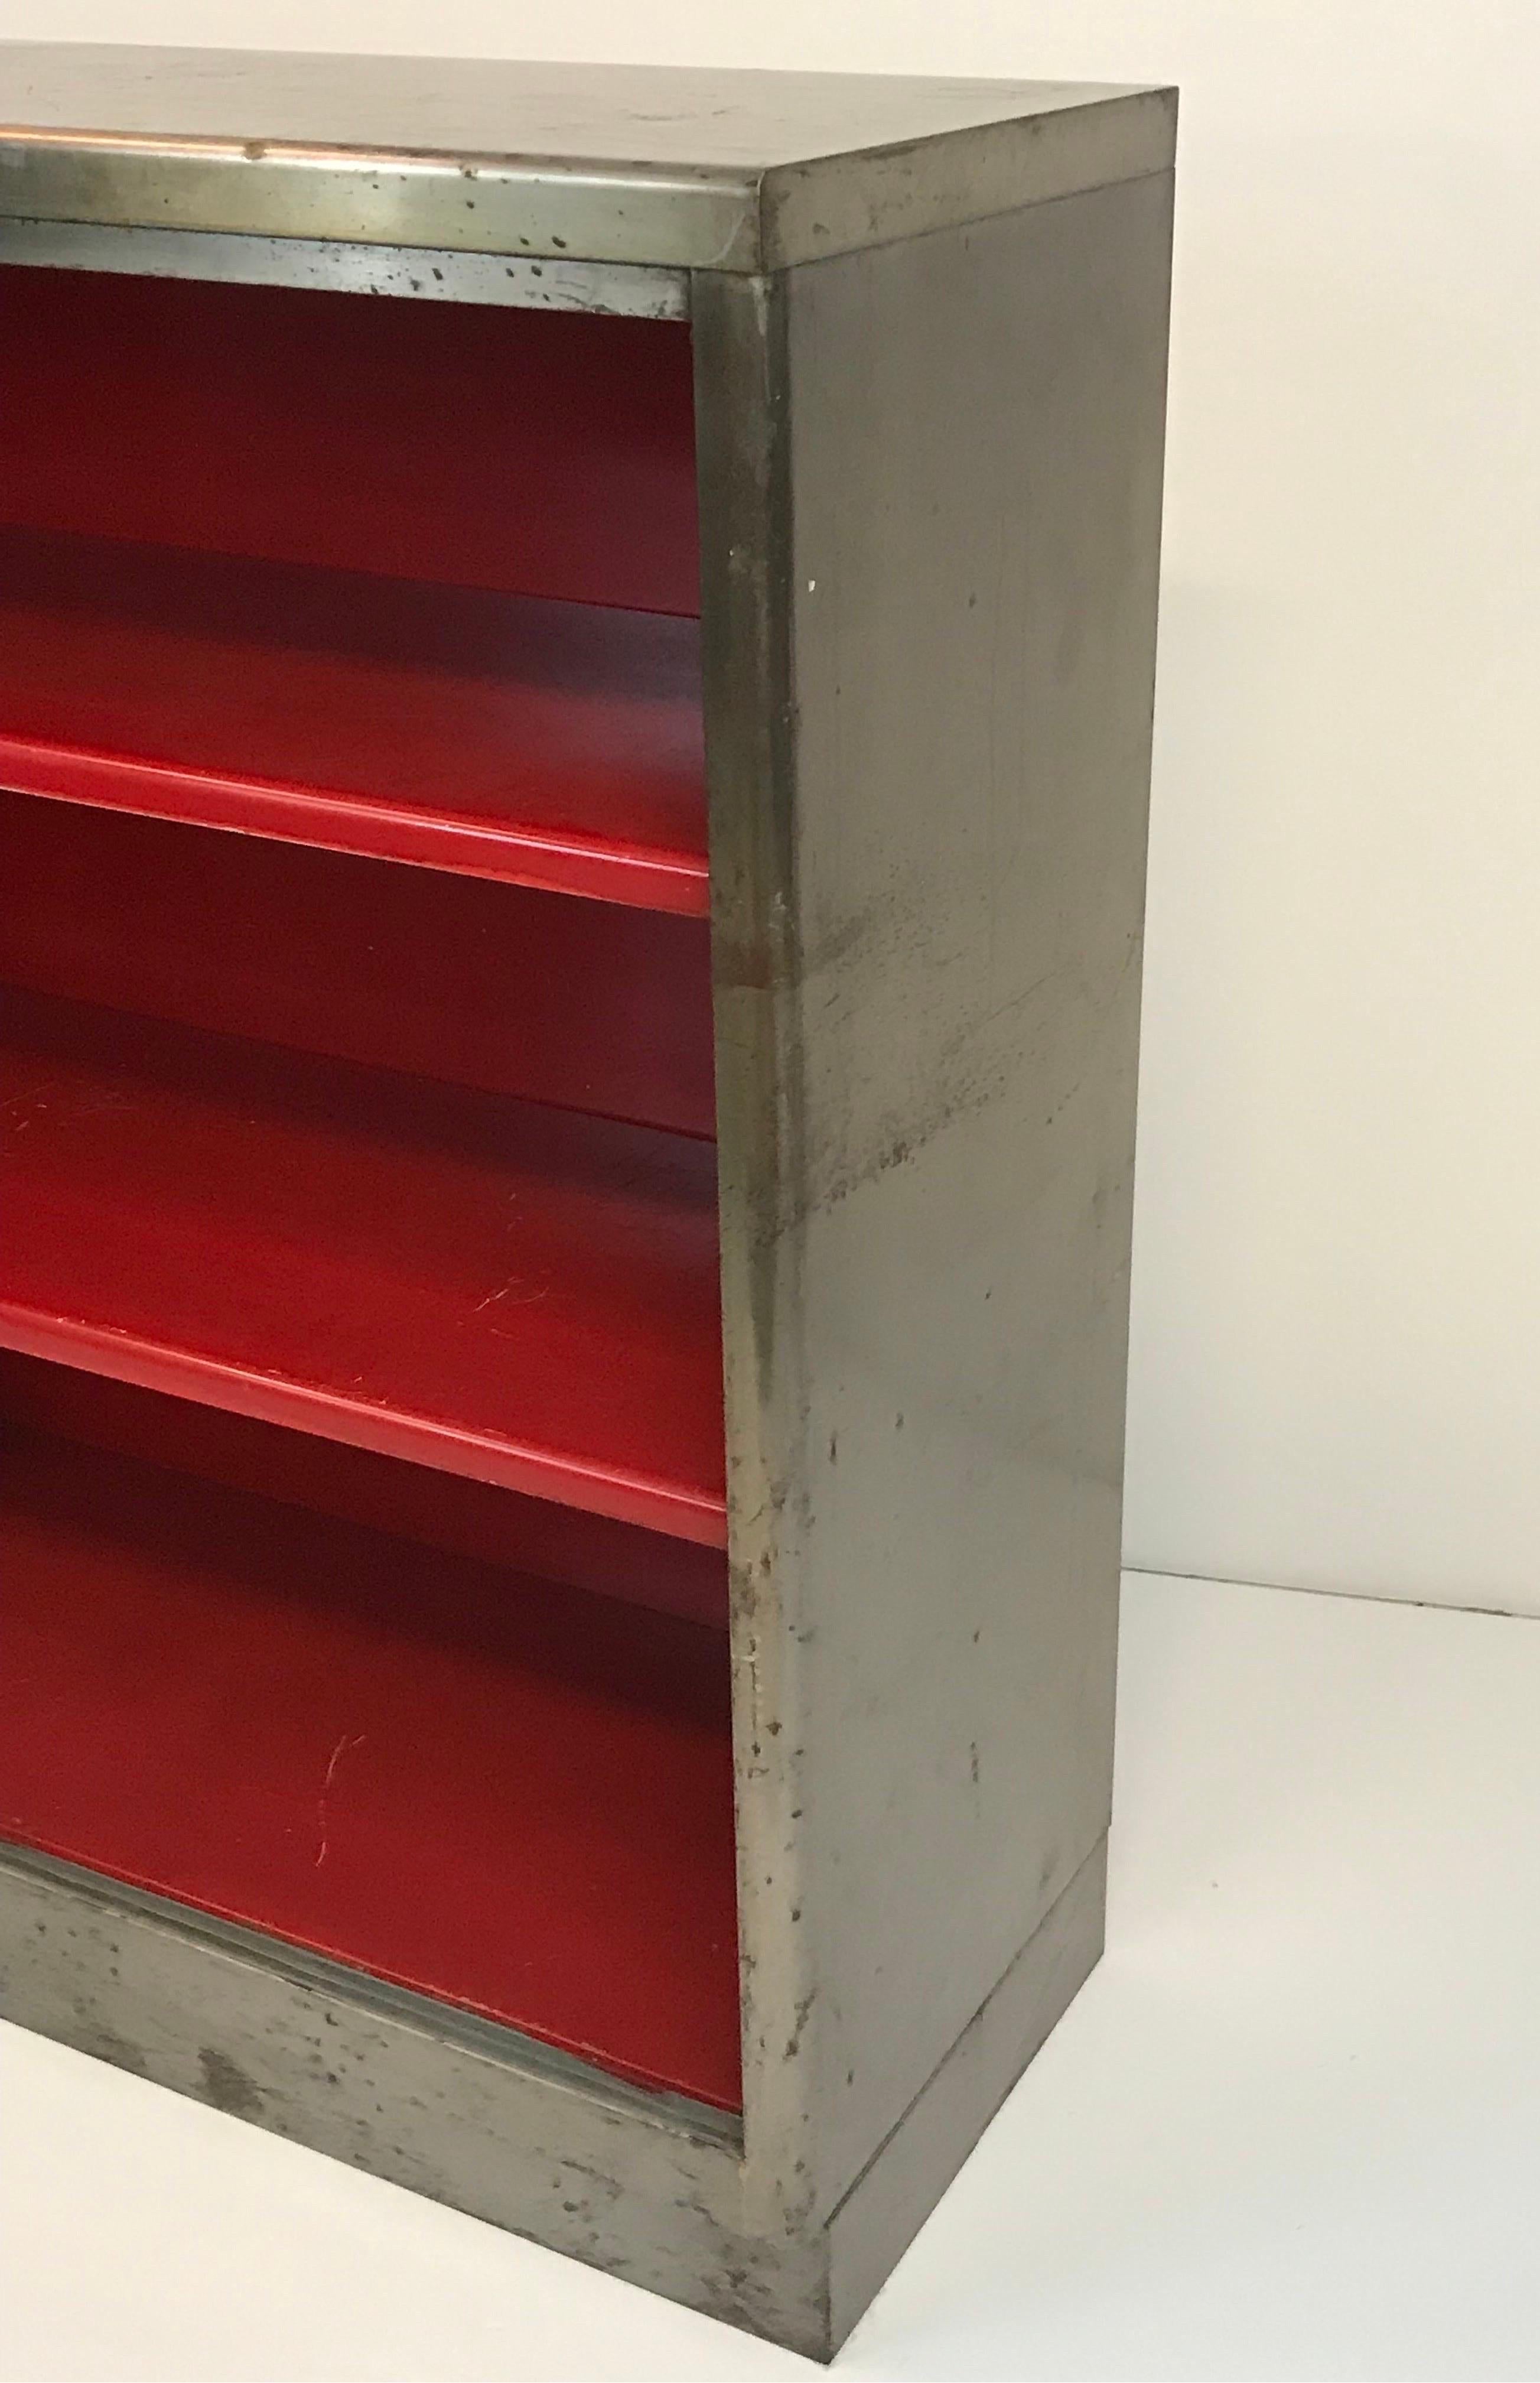 Vintage Art Metal Inc Steel Three Shelf Book Case with Bright Red Interior For Sale 3